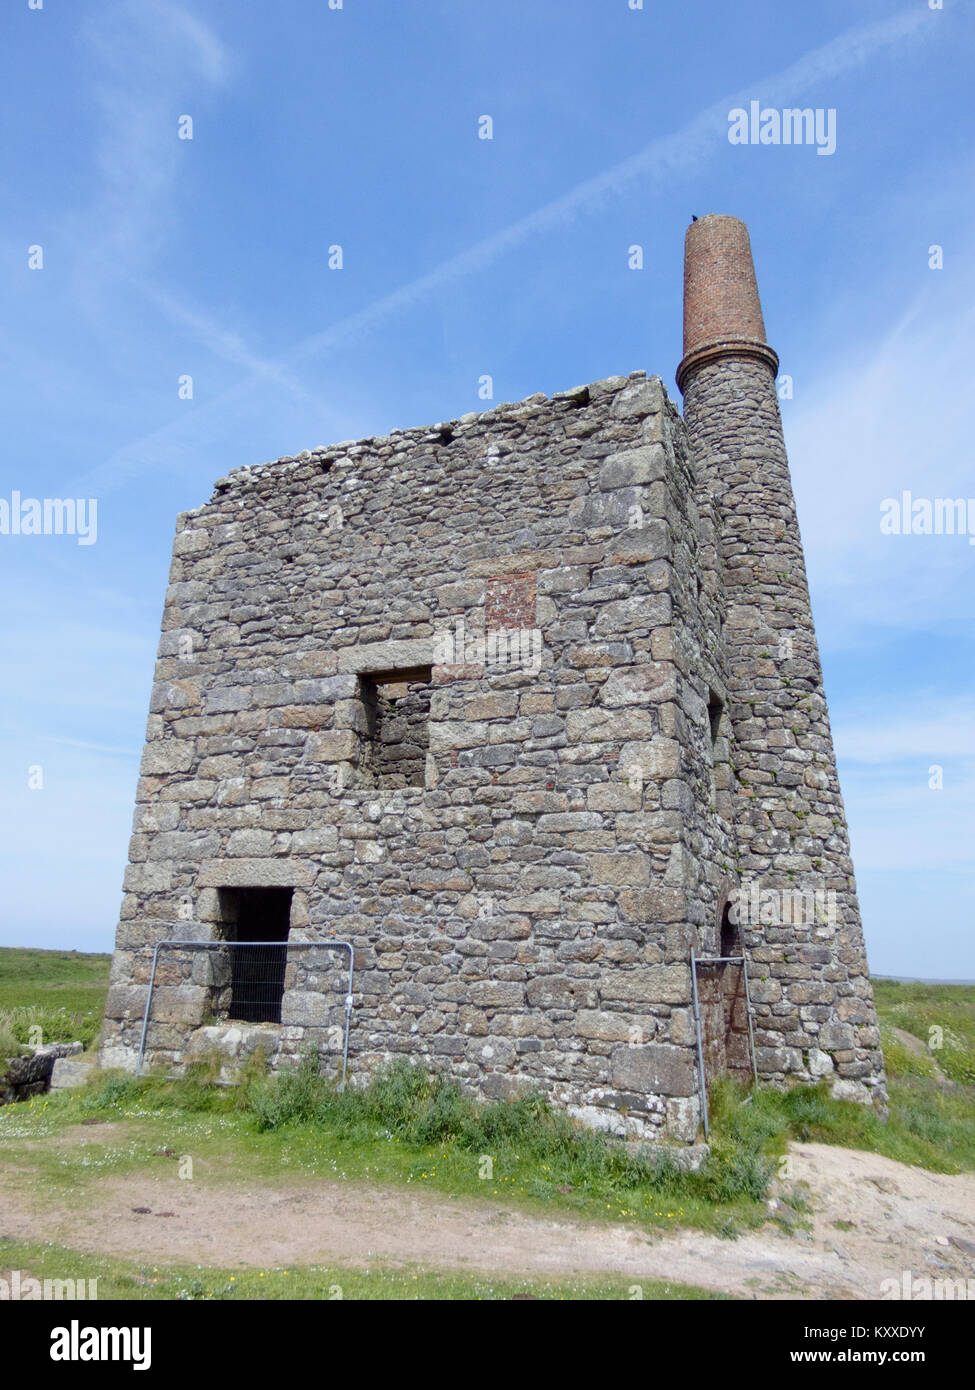 Disused Greenburrow Engine House, Ding Dong Tin Mine, Penwith Peninsula, Cornwall, England, UK in June Stock Photo